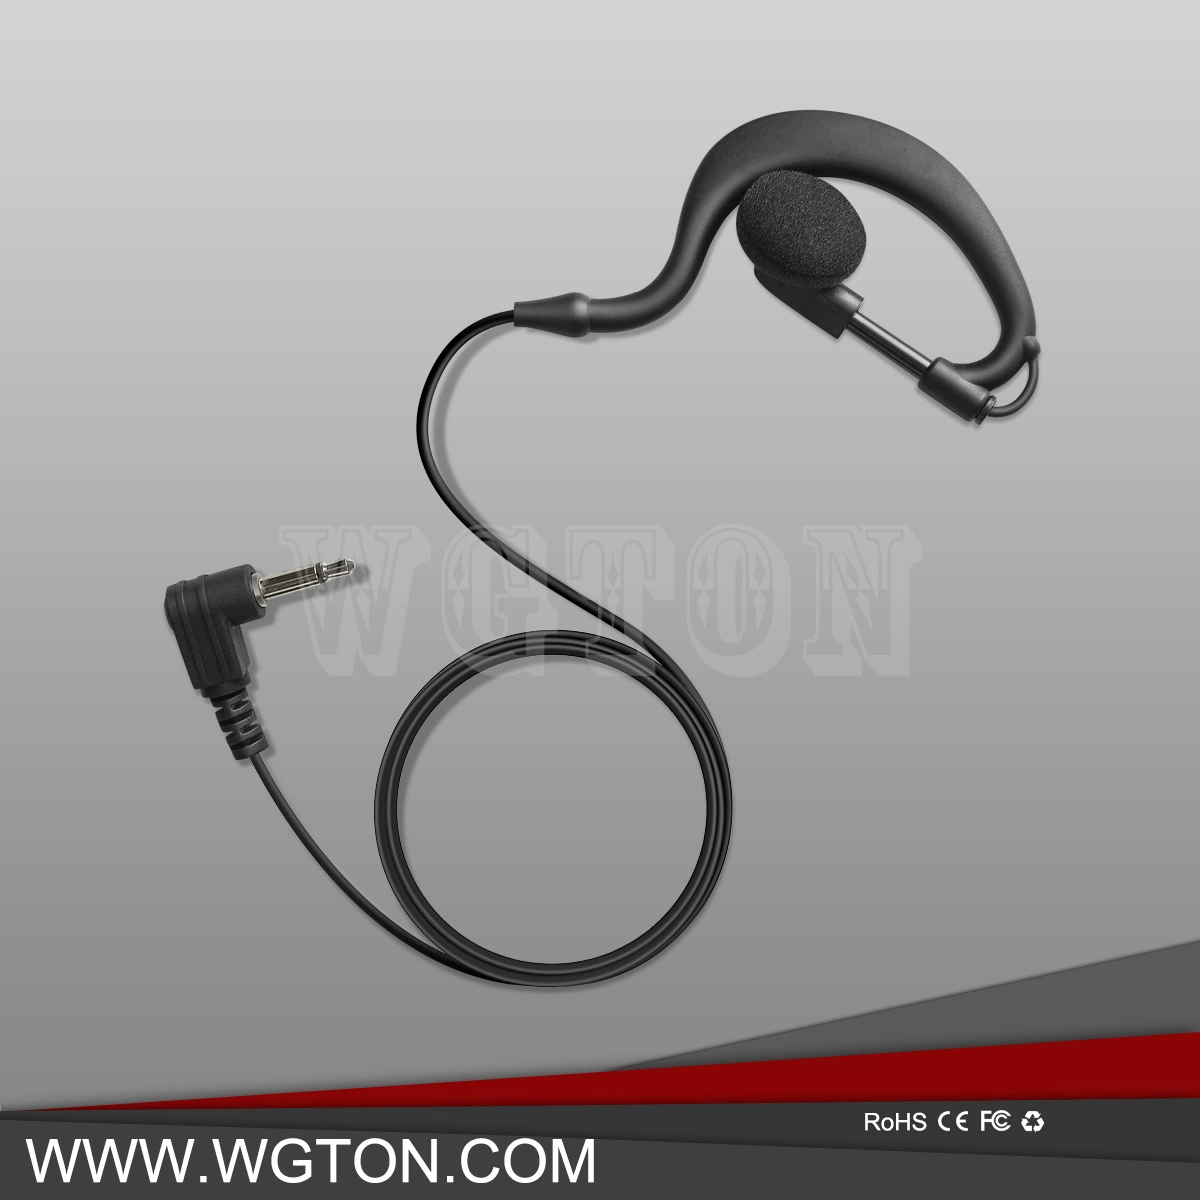 Two Way Radio with 2.5mm Jack Listen Only G Type Ear Hook Earpiece